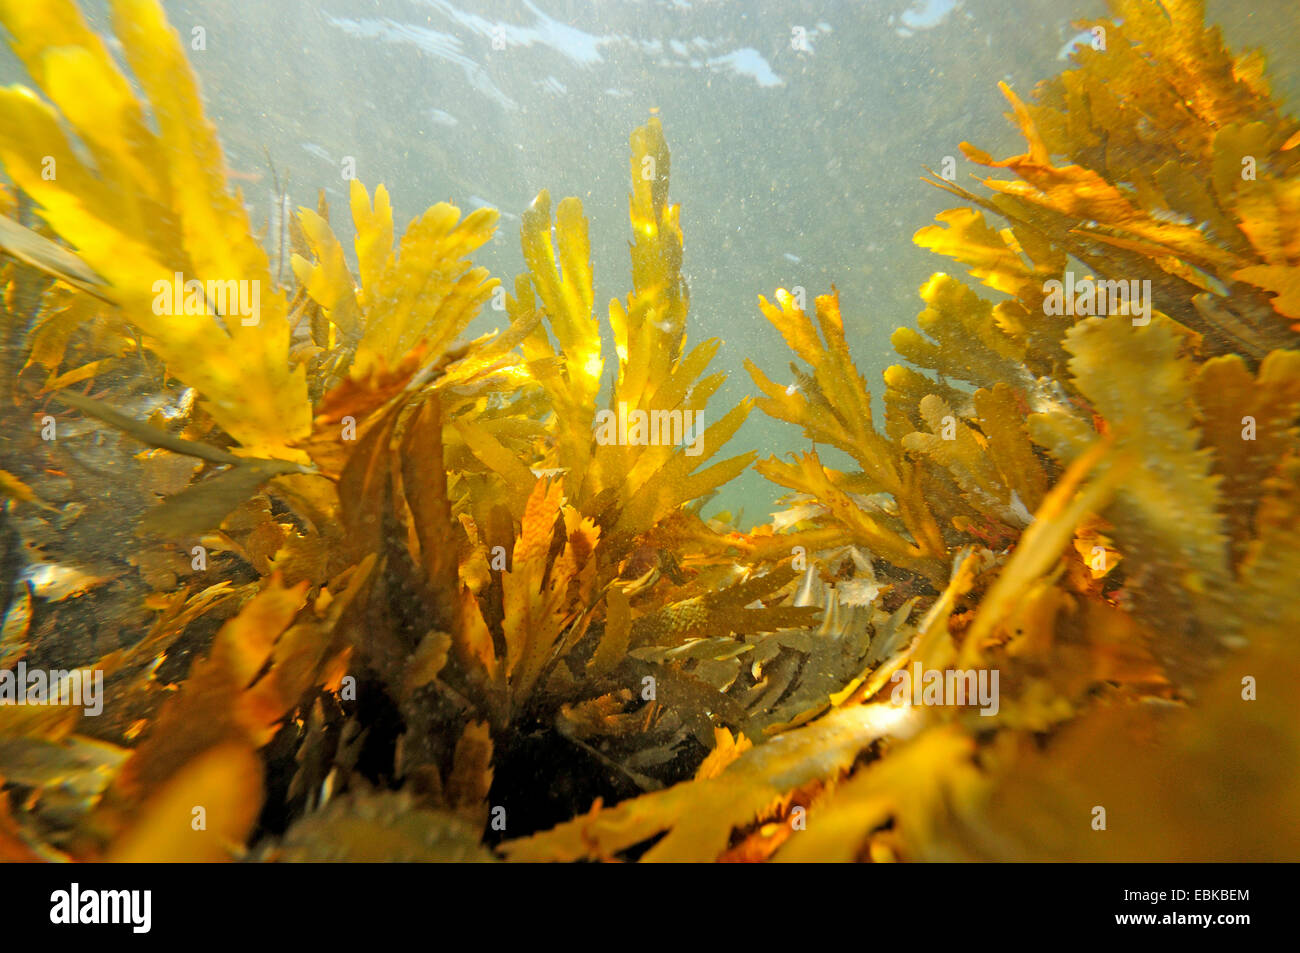 black wrack, toothed wrack, serrated wrack (Fucus serratus), under water, France, Brittany Stock Photo